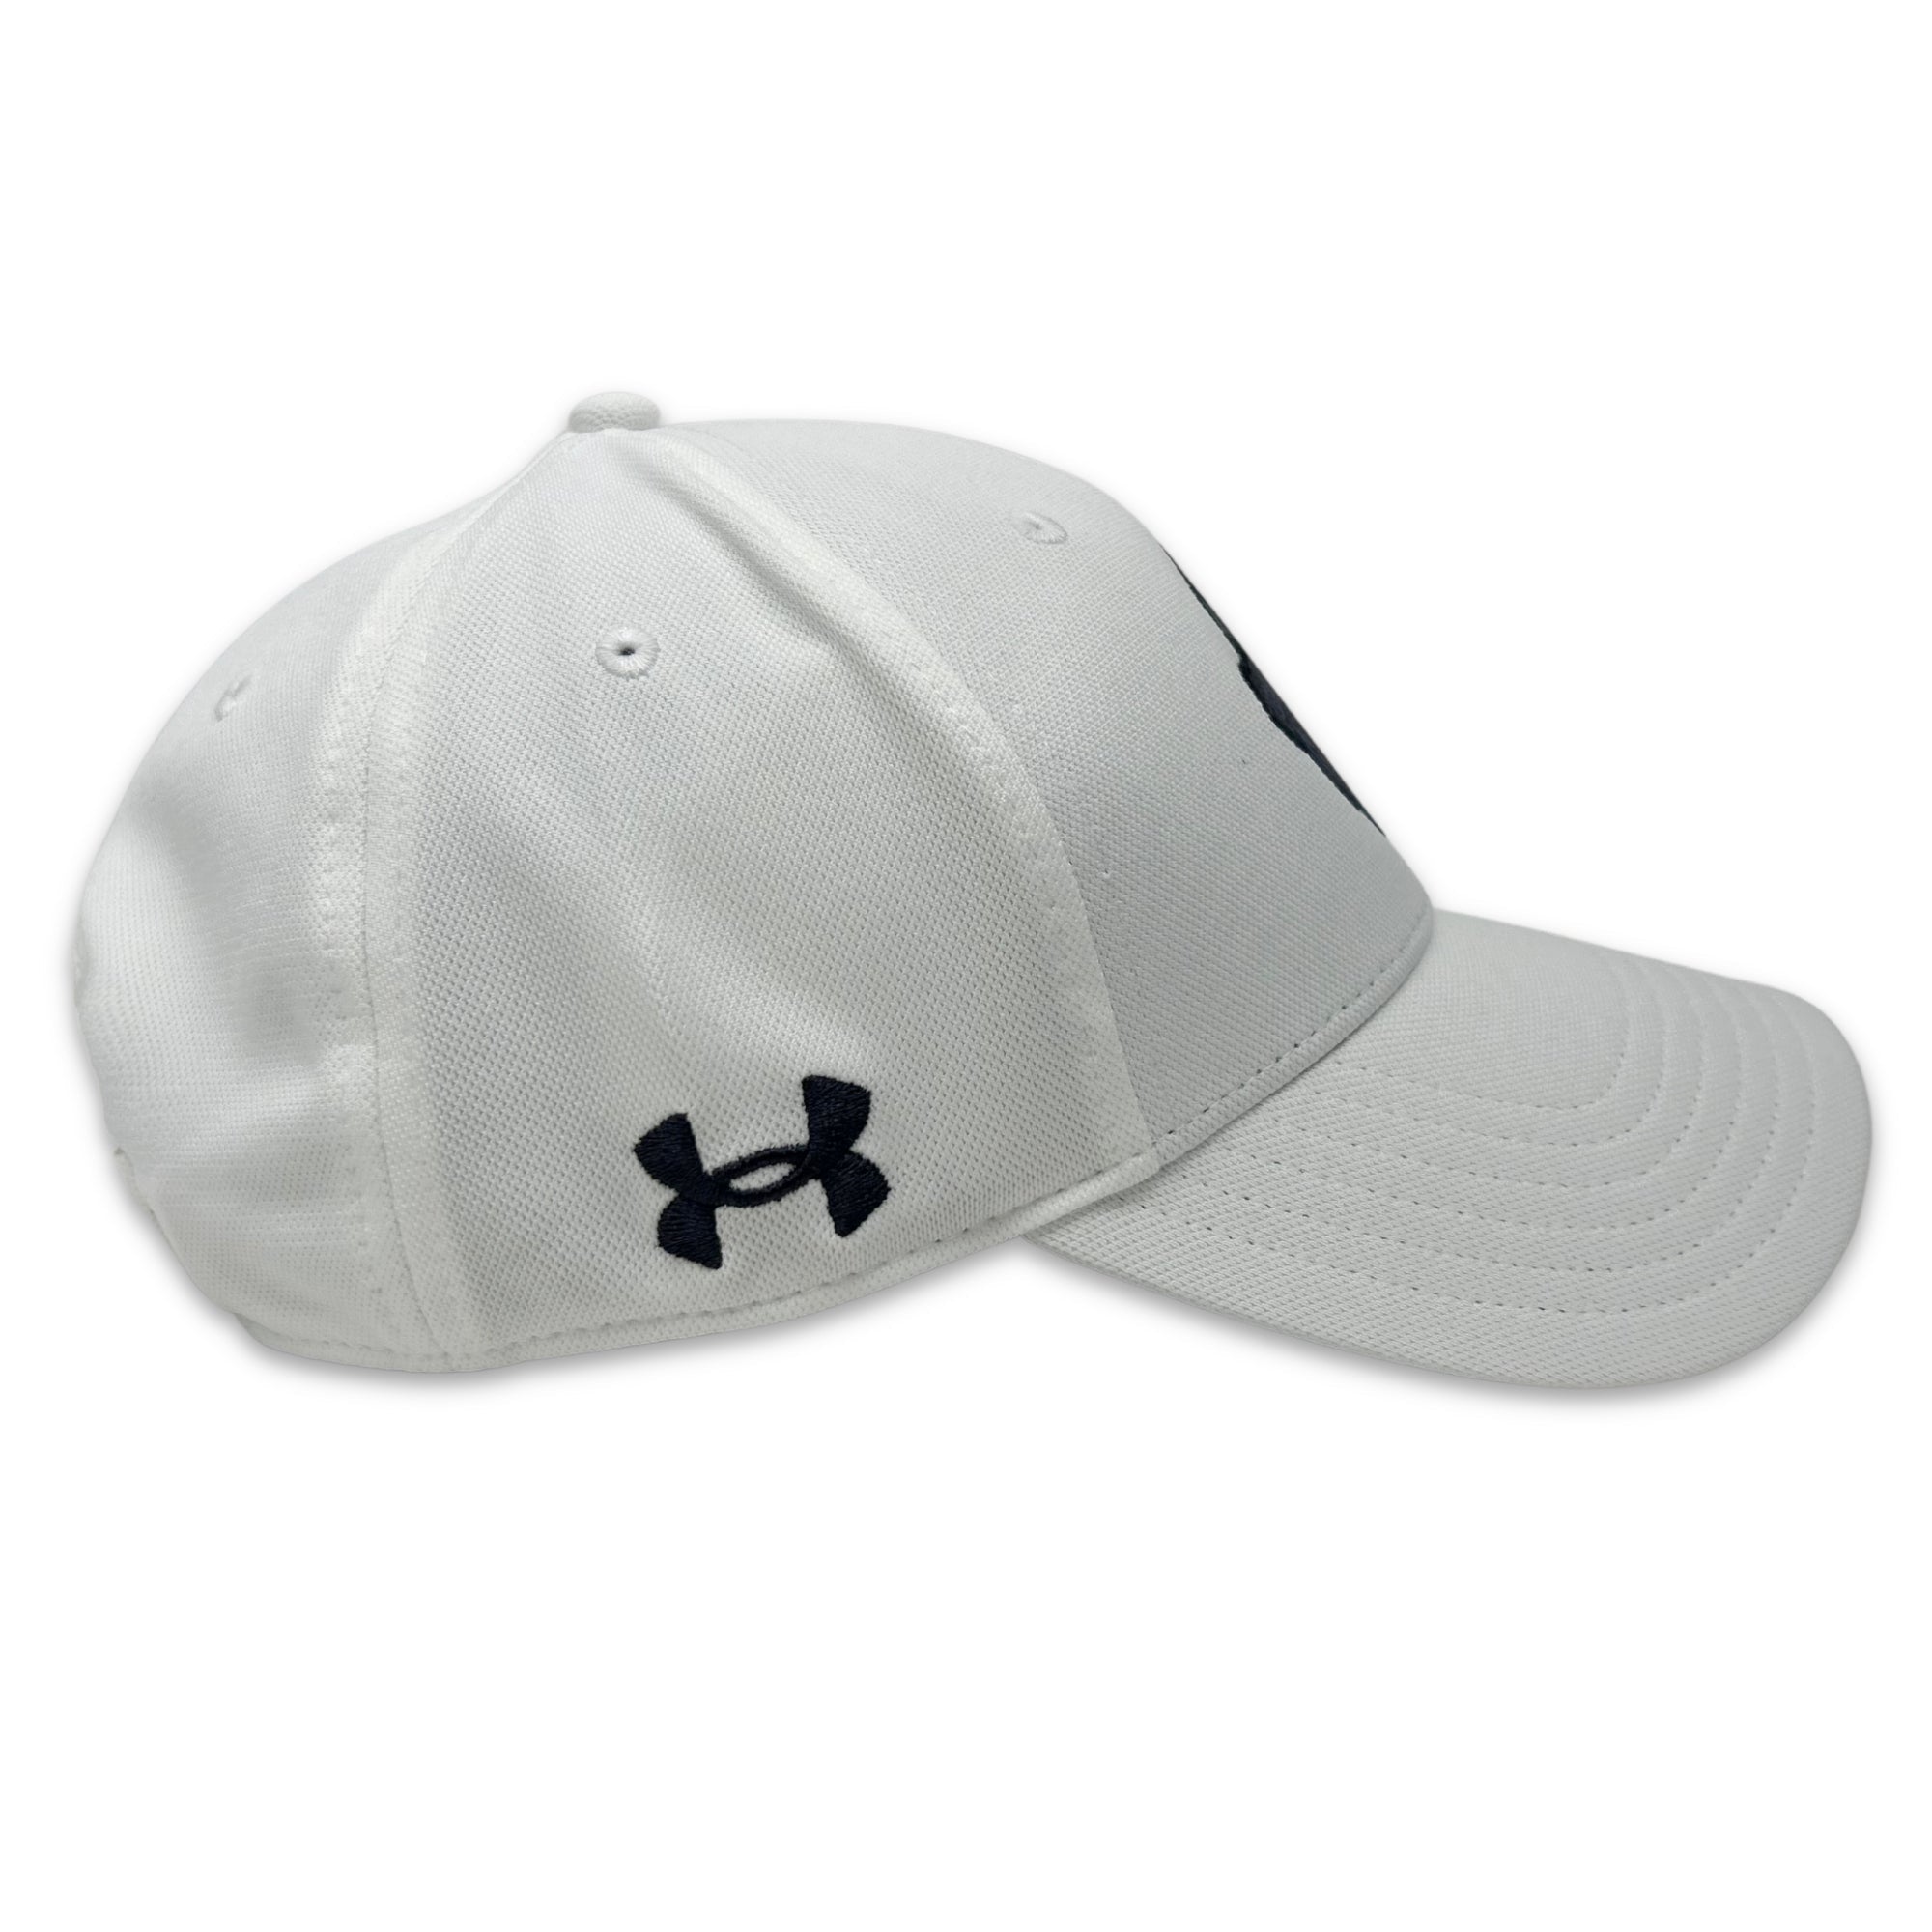  Under Armour Baseball Hat Royal : Clothing, Shoes